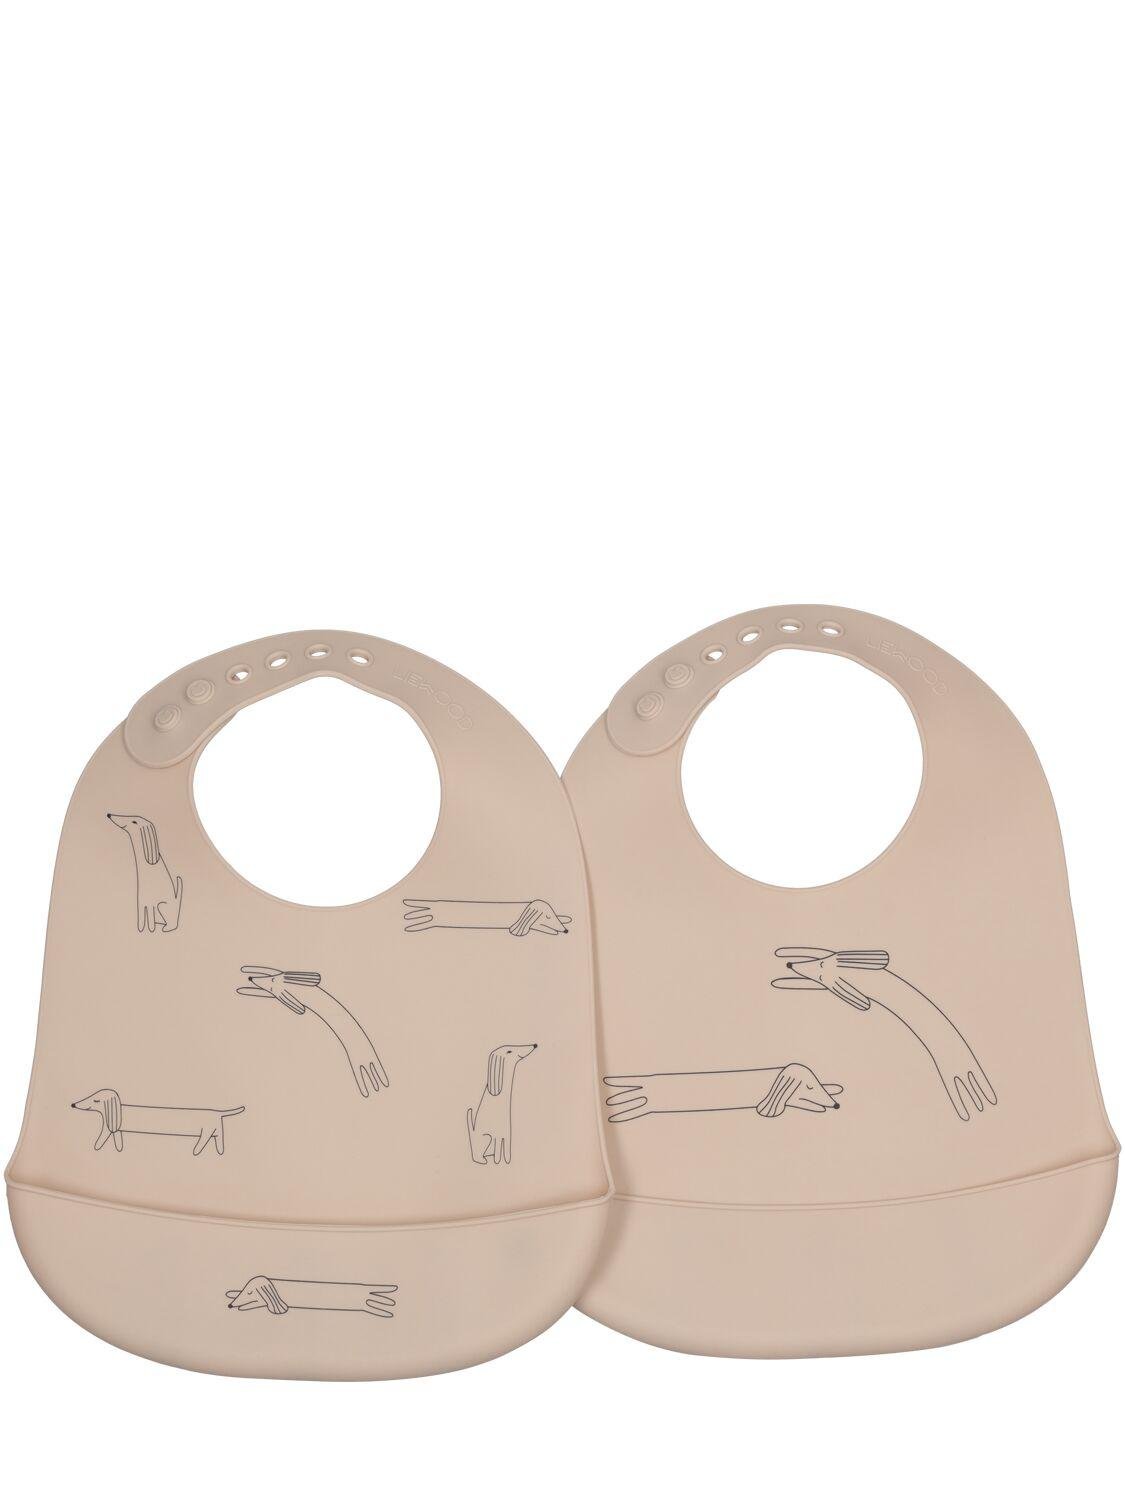 Set Of 2 Dog Print Silicon Bibs by LIEWOOD